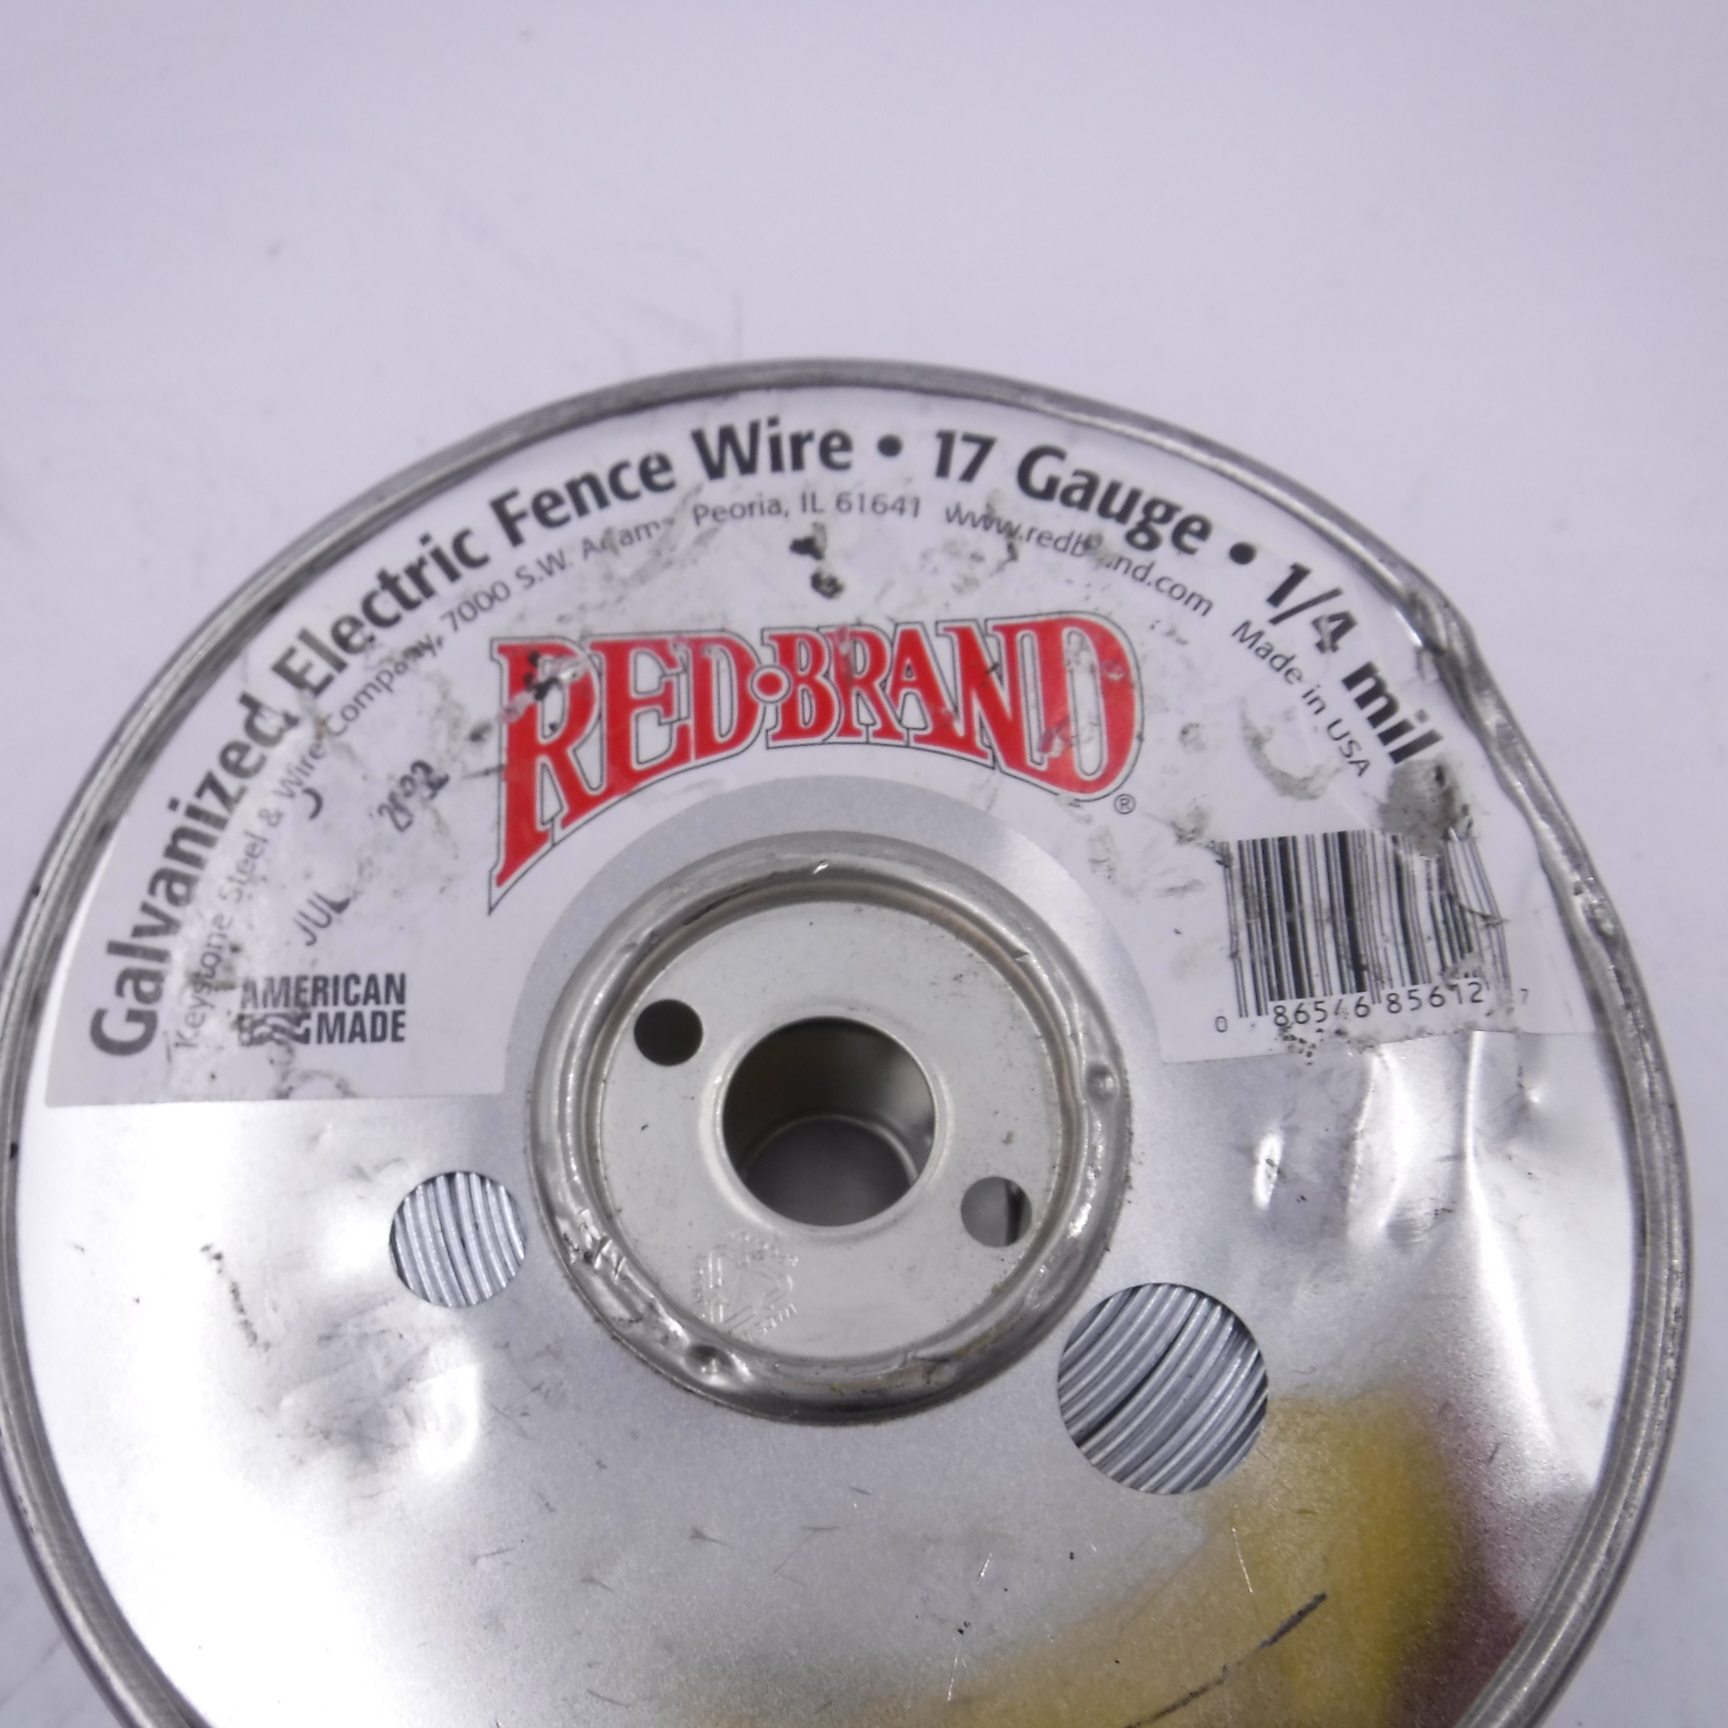 Red Brand Galvanized Electric Fence Wire - 14 Gauge - 1/2 Mile